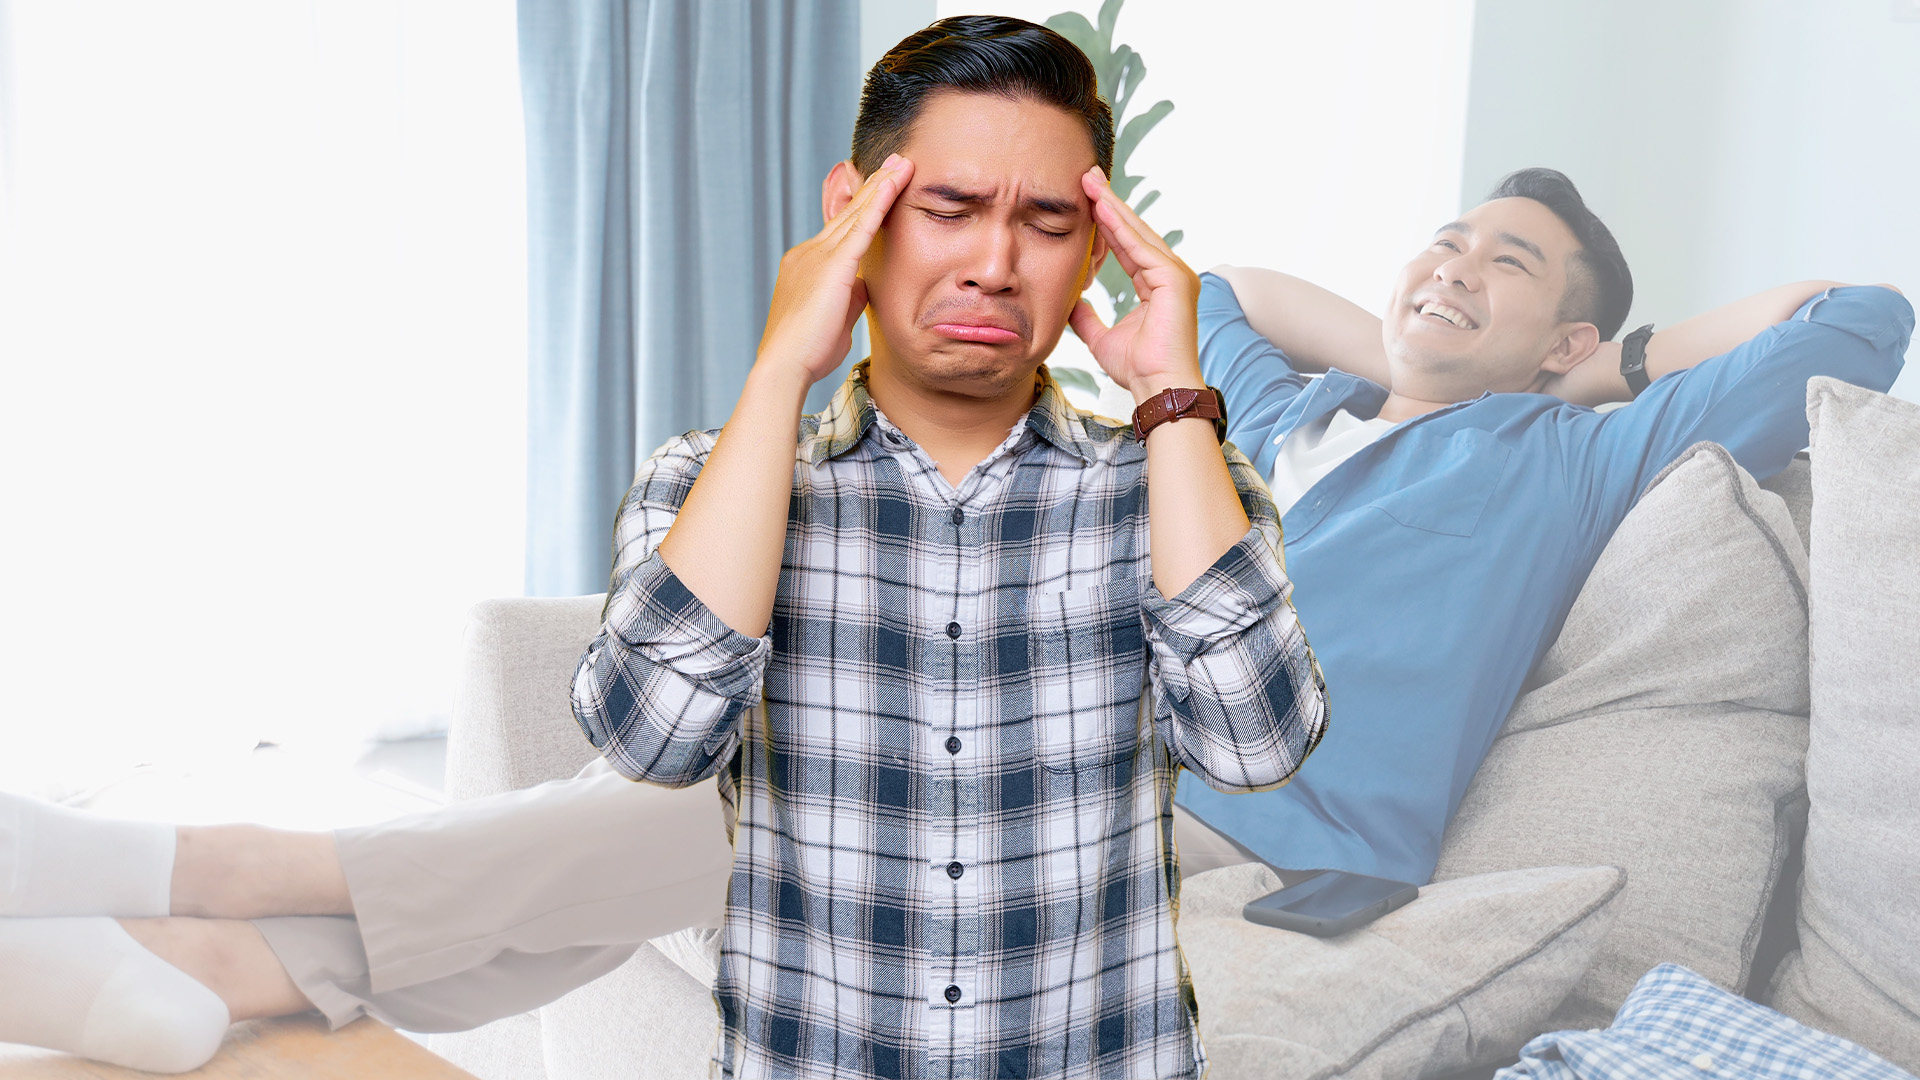 A company boss in China has sparked a wave of online anger by threatening to cancel weekends off for staff after messages he sent them on the rest days were ignored. Photo: SCMP composite/Shutterstock